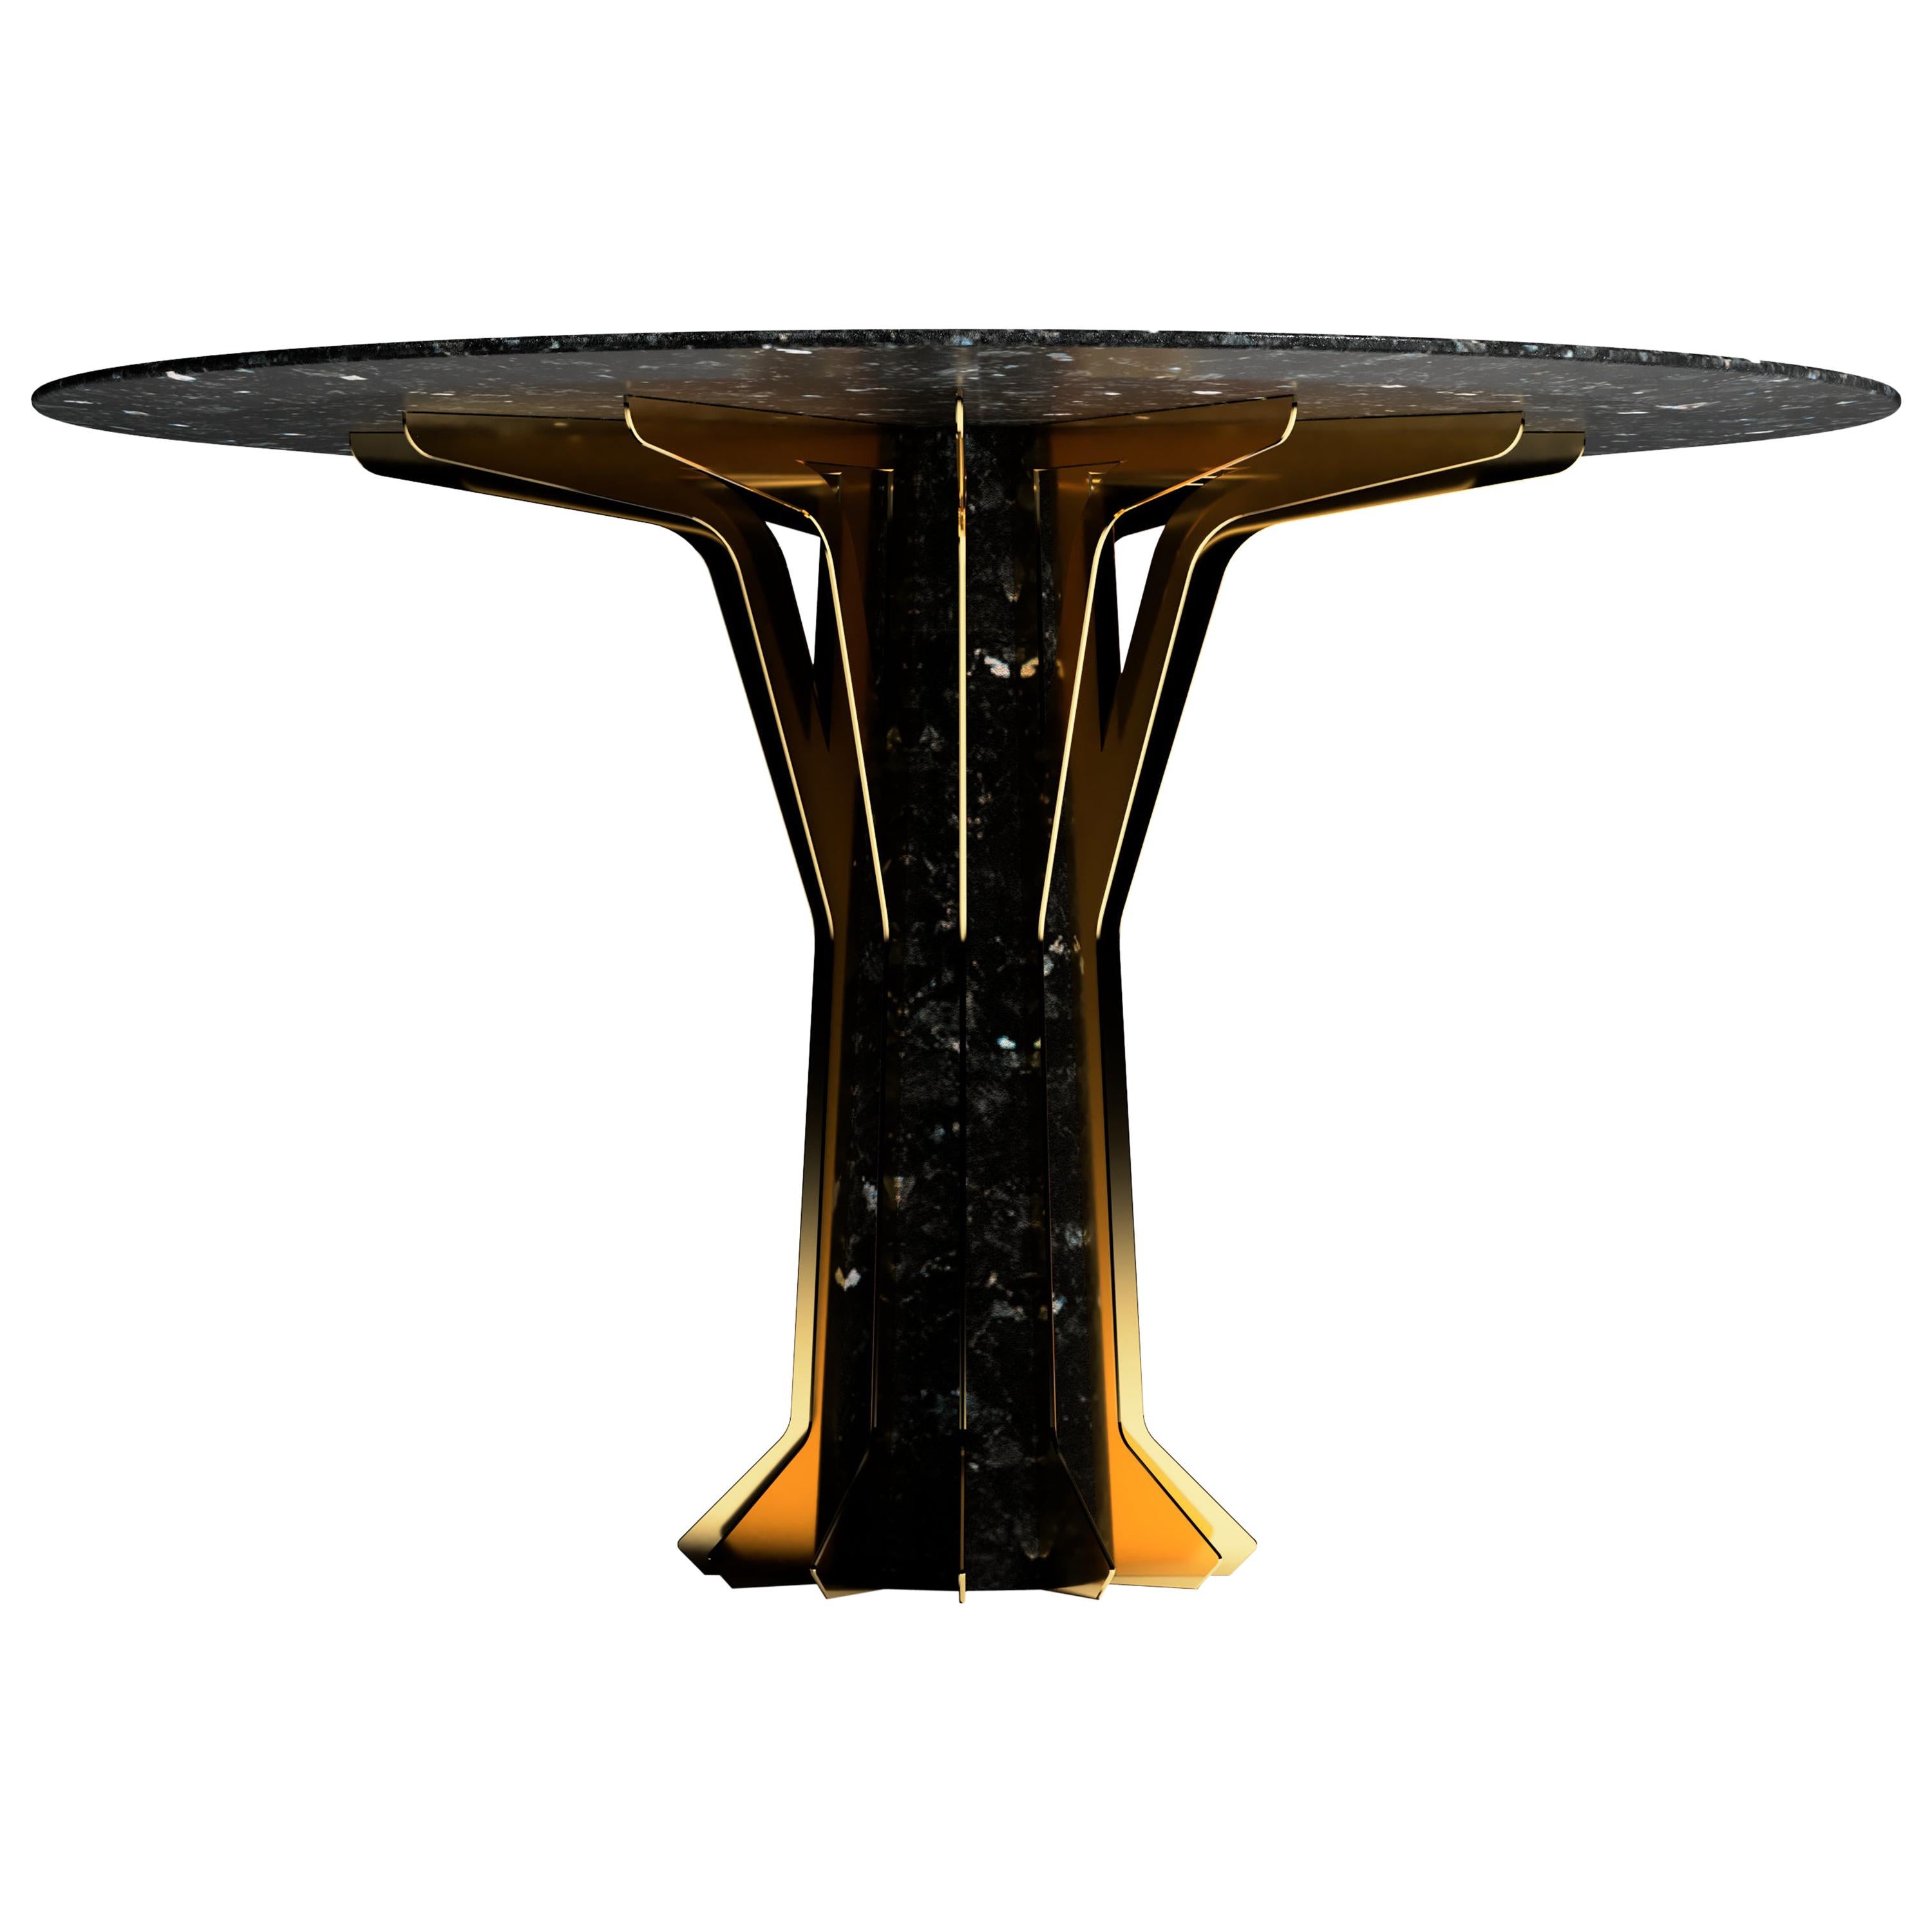 "The Icar's Wings" Center Table ft. Black Pearl Granite and Satin Brass For Sale